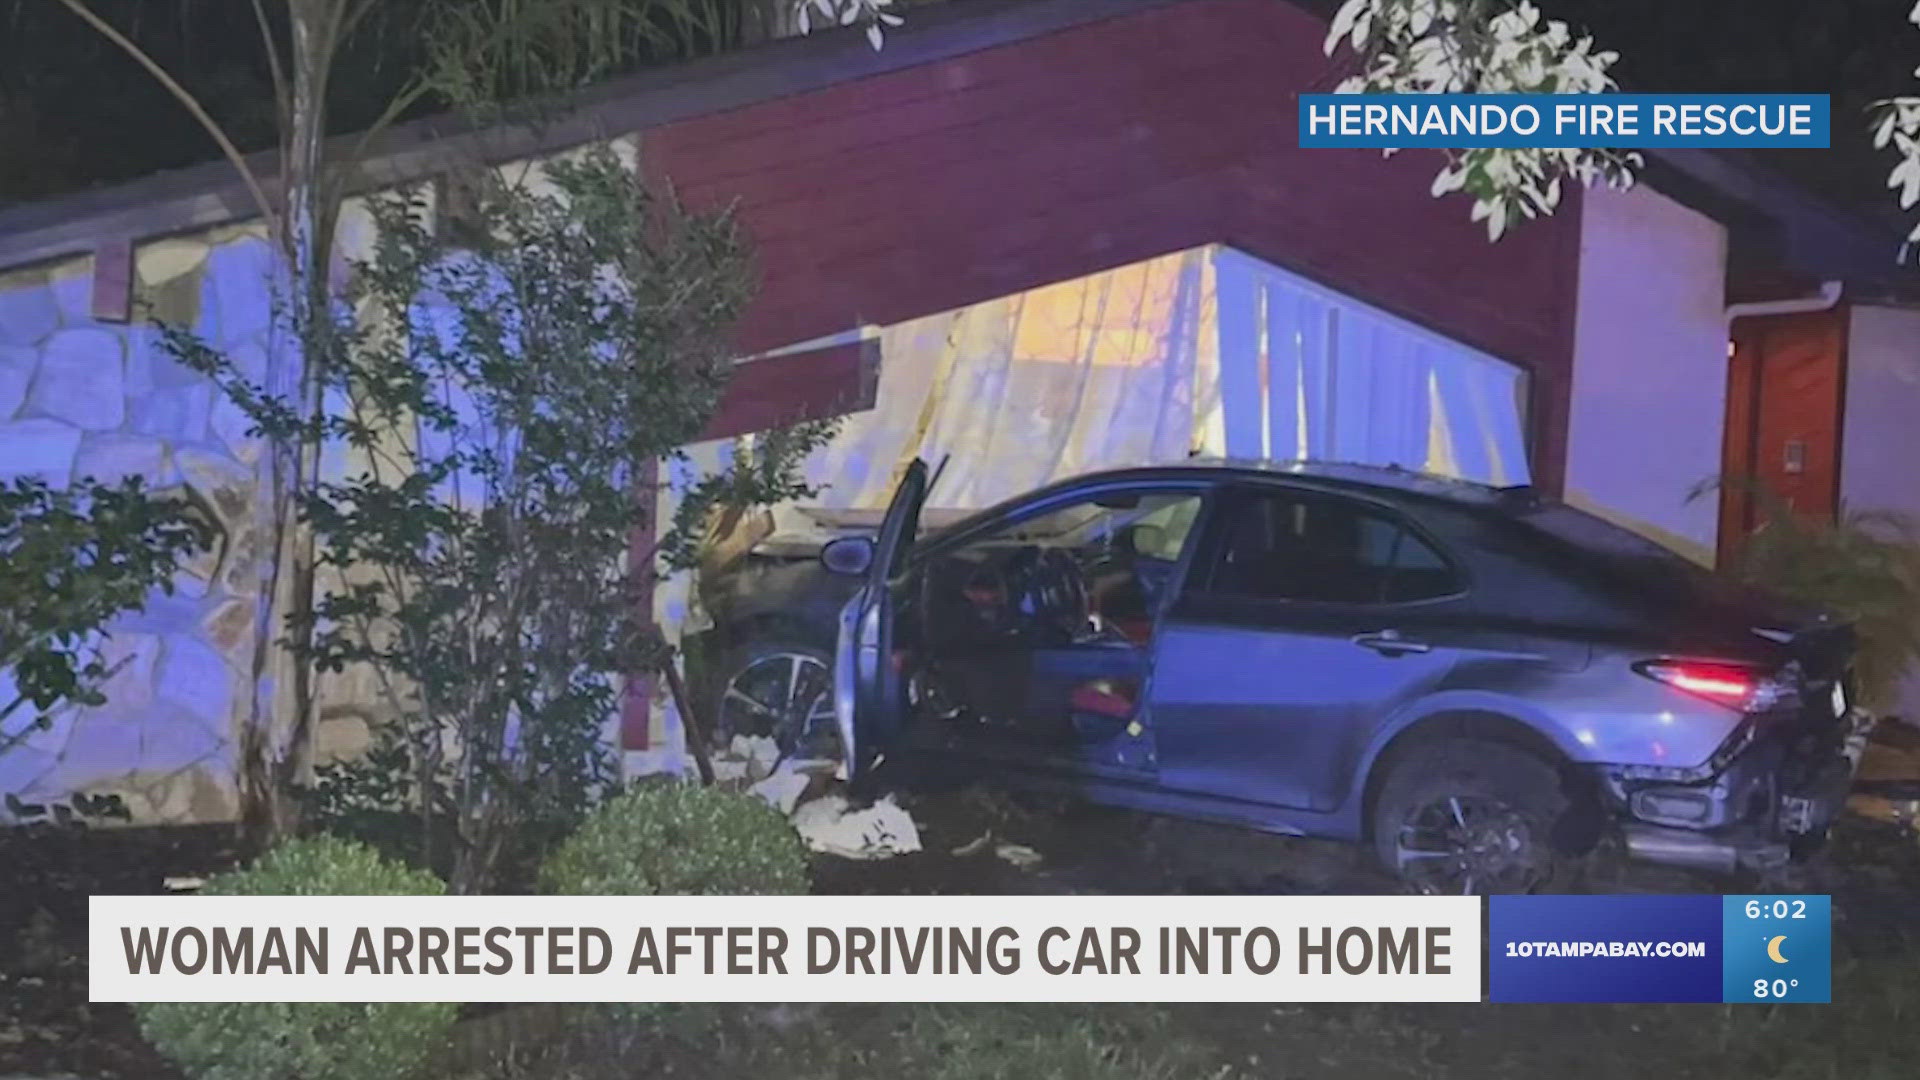 A 29-year-old woman allegedly crashed her car into a home in Hernando County, resulting in thousands of dollars in damages.